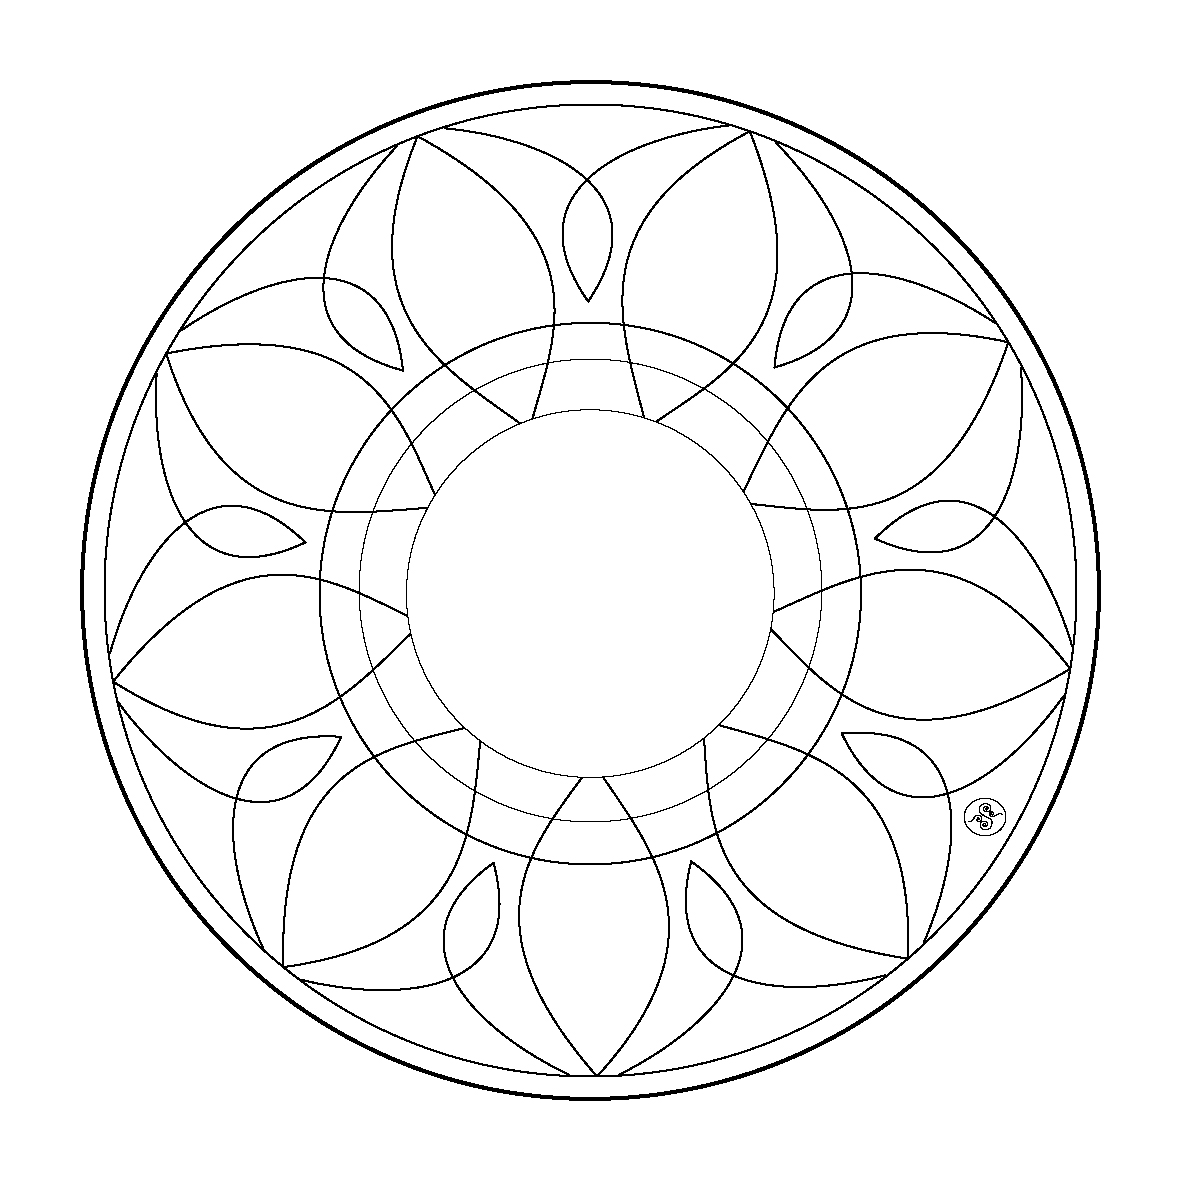  Mandala Coloring pages | FREE coloring pages | #21